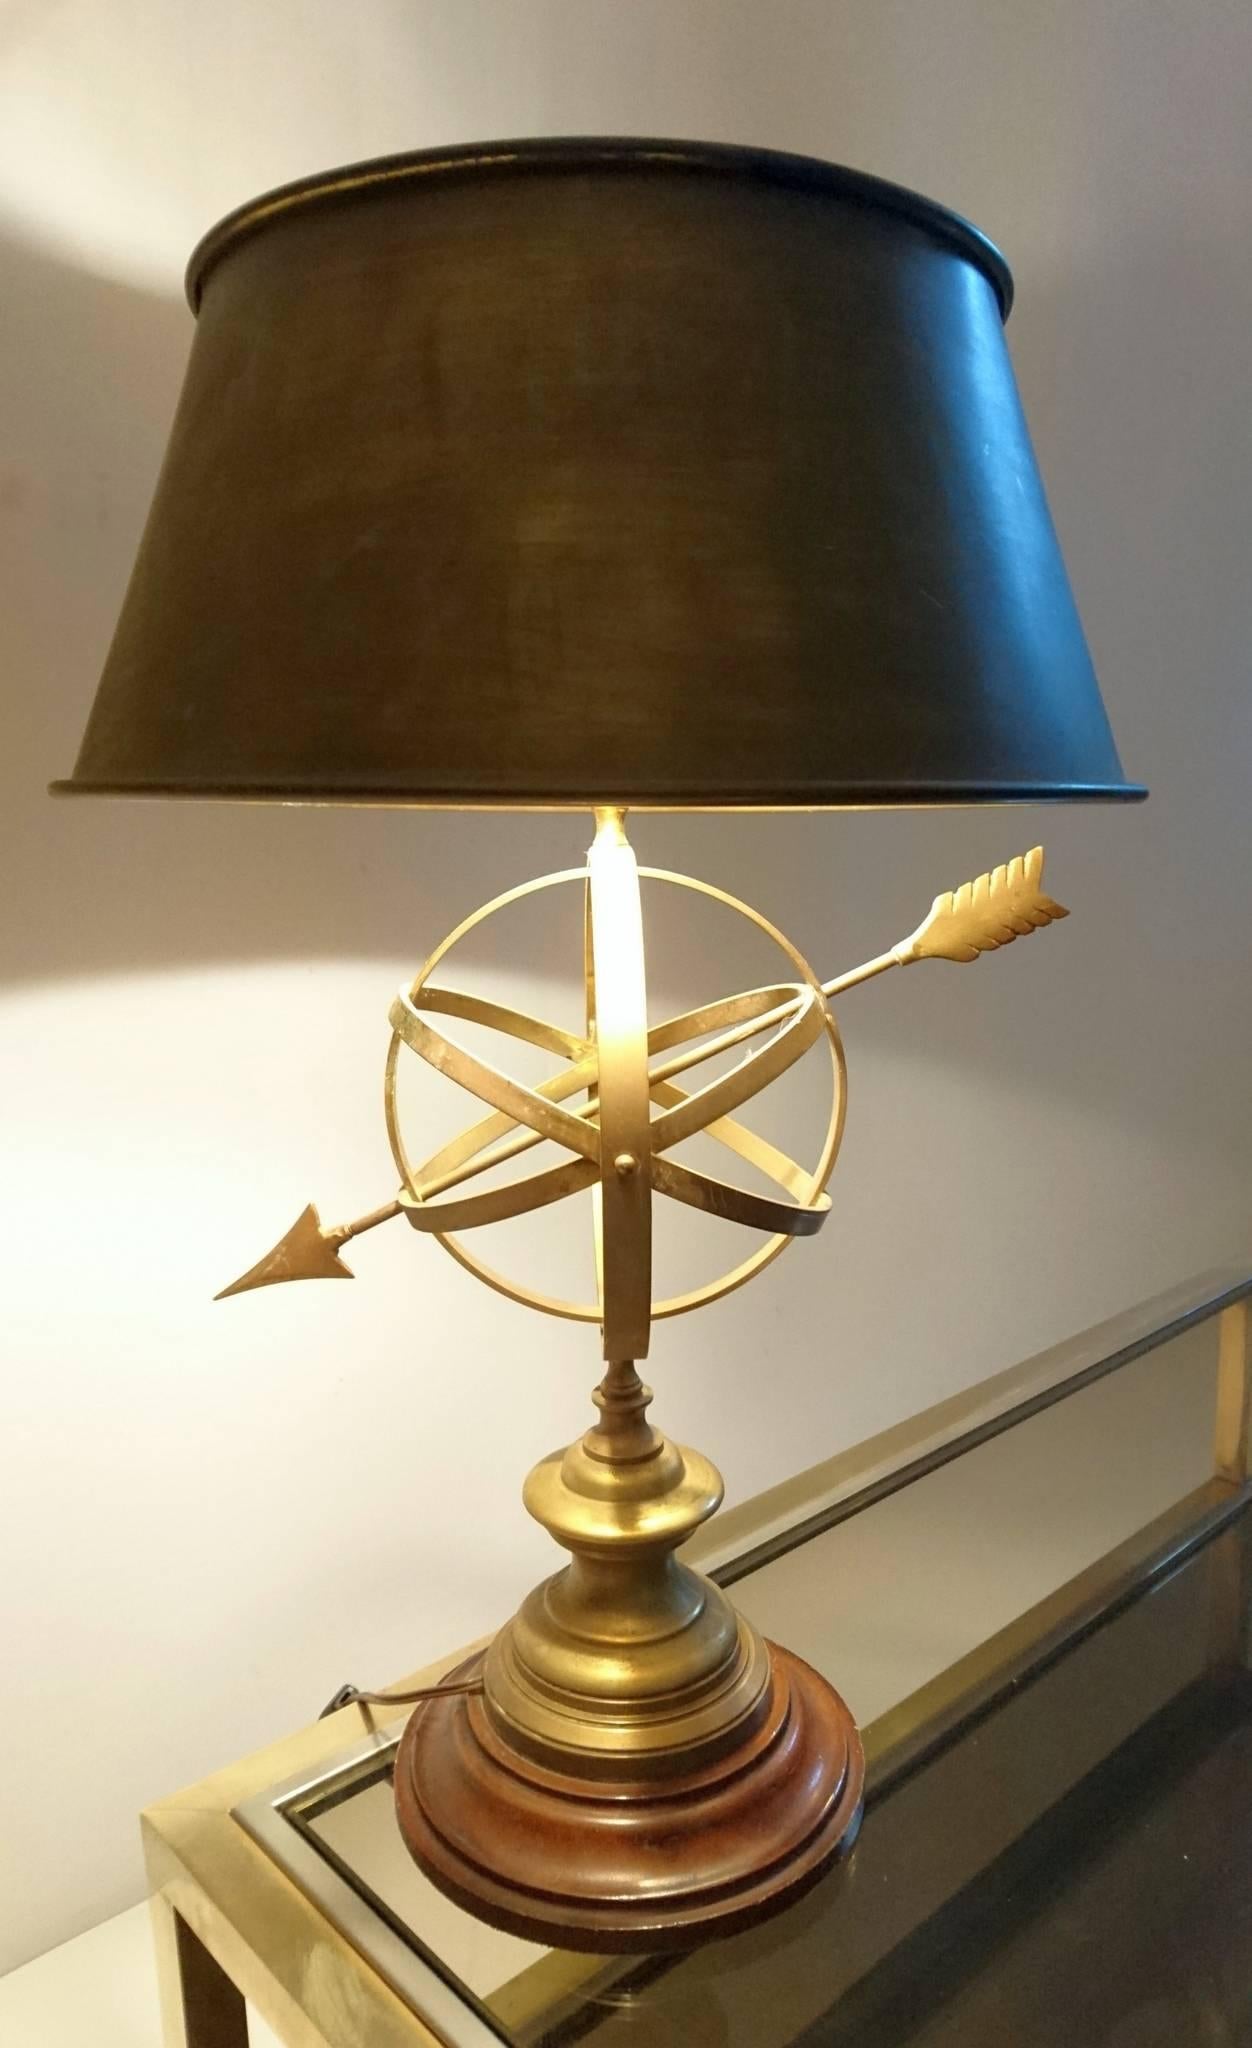 Vintage table lamp with a stained wooden base and centre in solid brass with a sundial. The shade which is original is also made of patinated brass. Has room for two standard E27 bulbs. Gives a warm glow when lit.